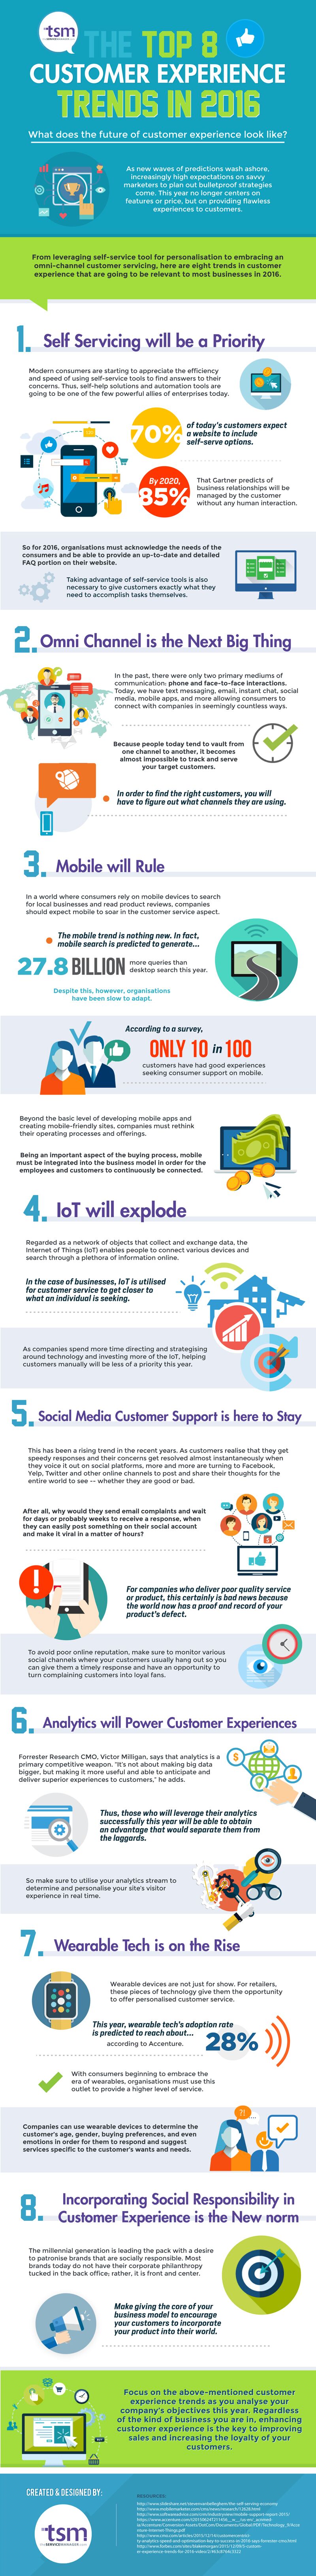 The-Top-8-Customer-Experience-Trends-in-2016 infographic by TSM